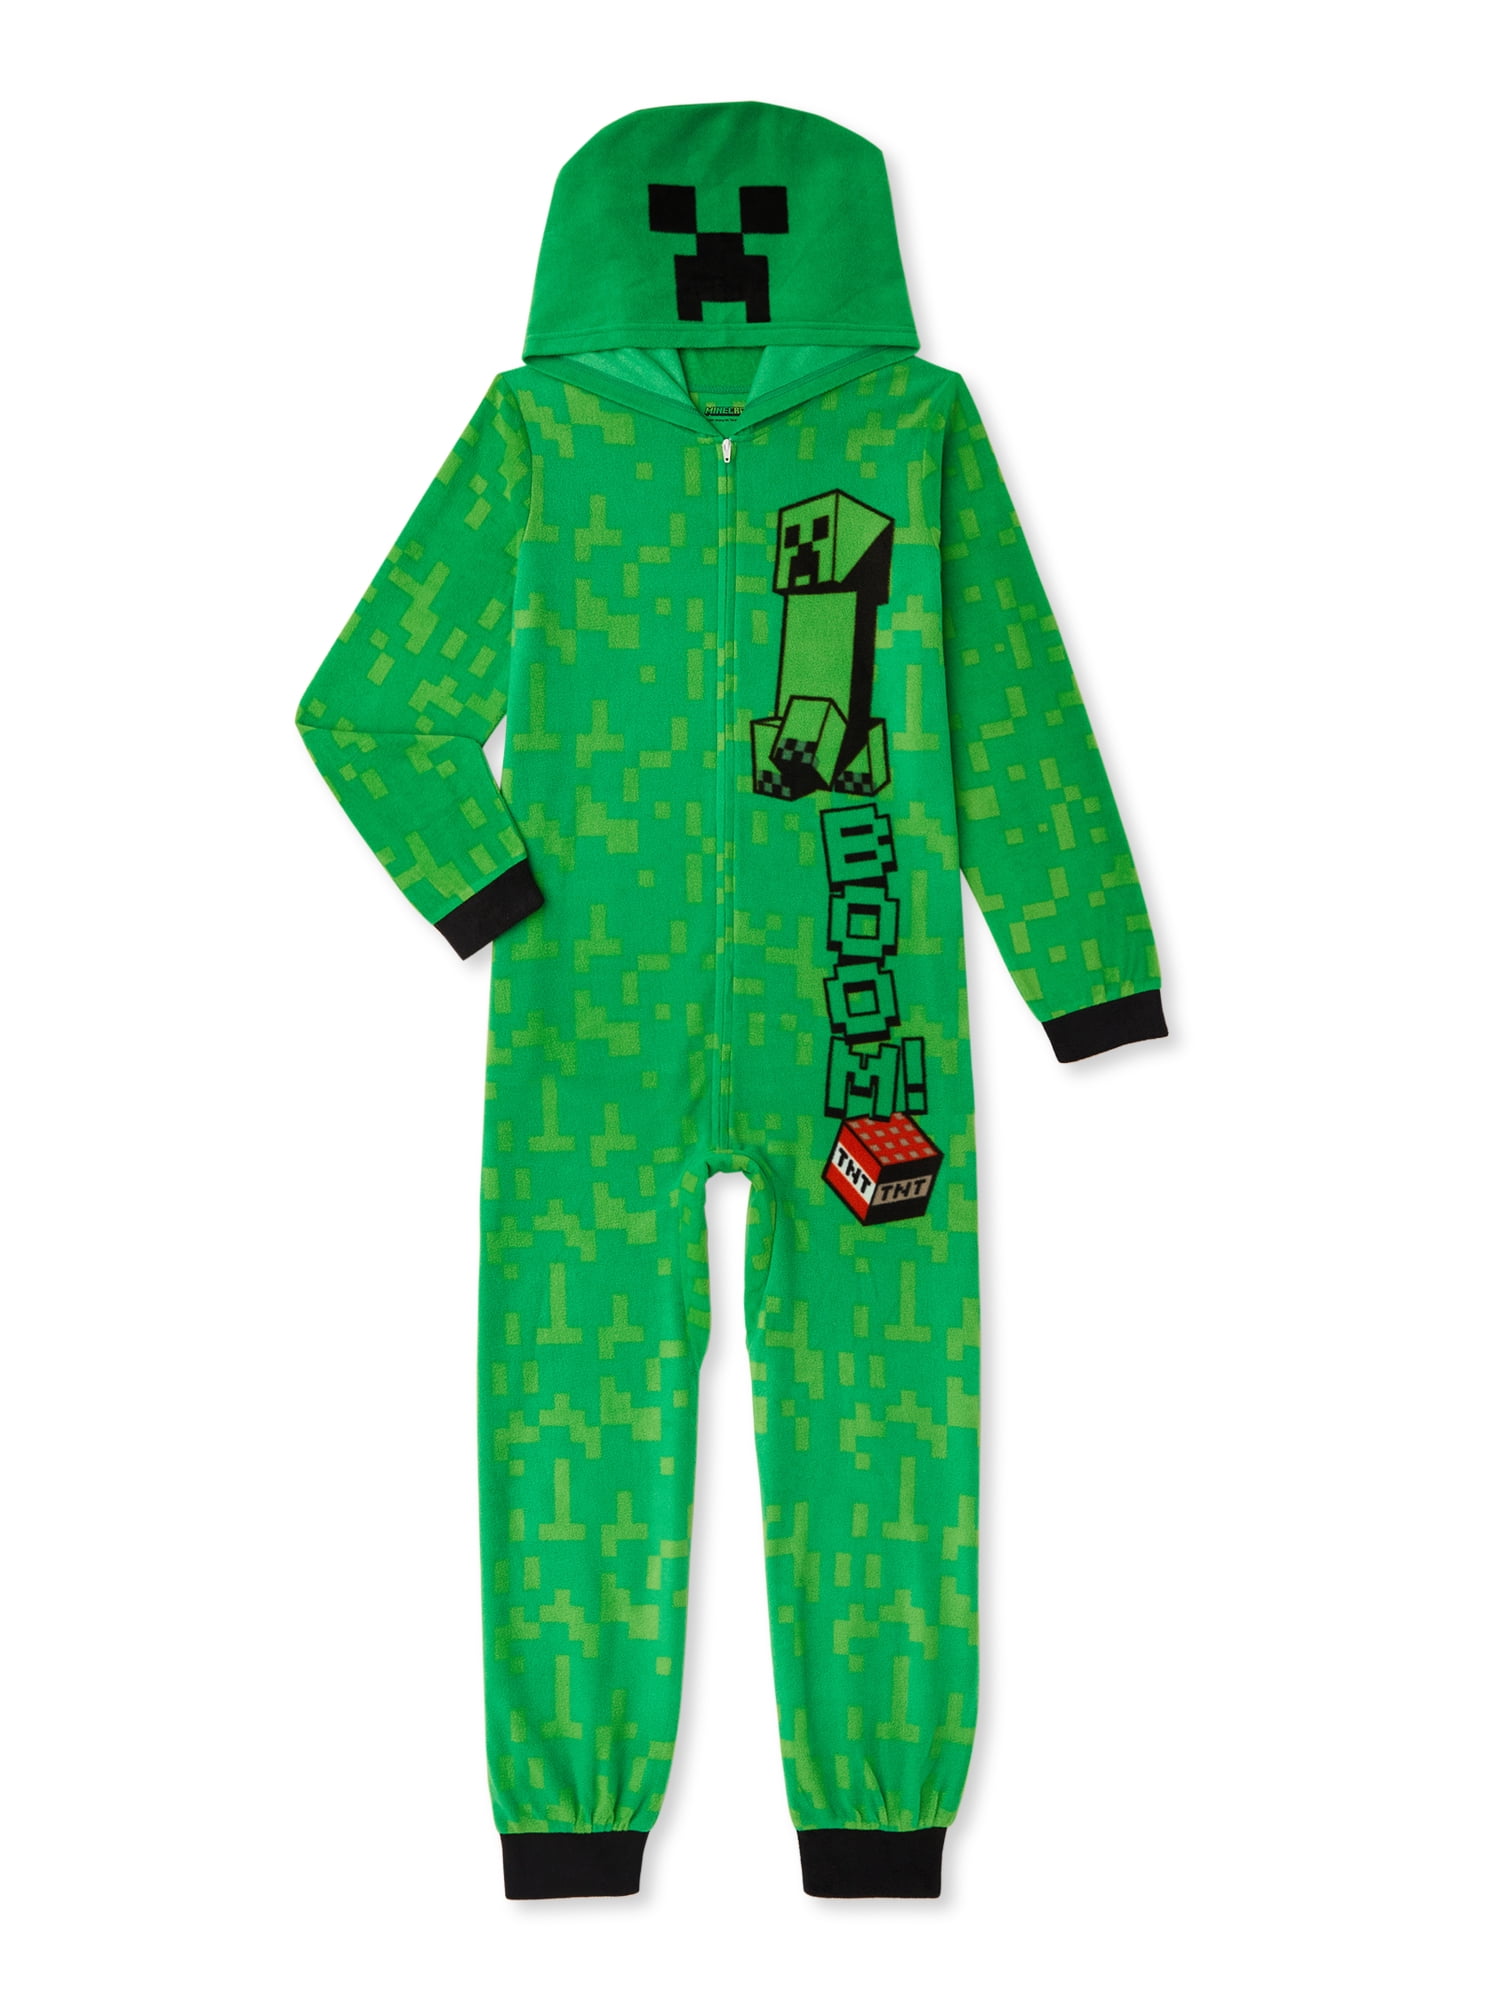 Video Game Pajamas Size 8,10/12 L Boys Blanket Sleeper One Piece Union Suit NEW